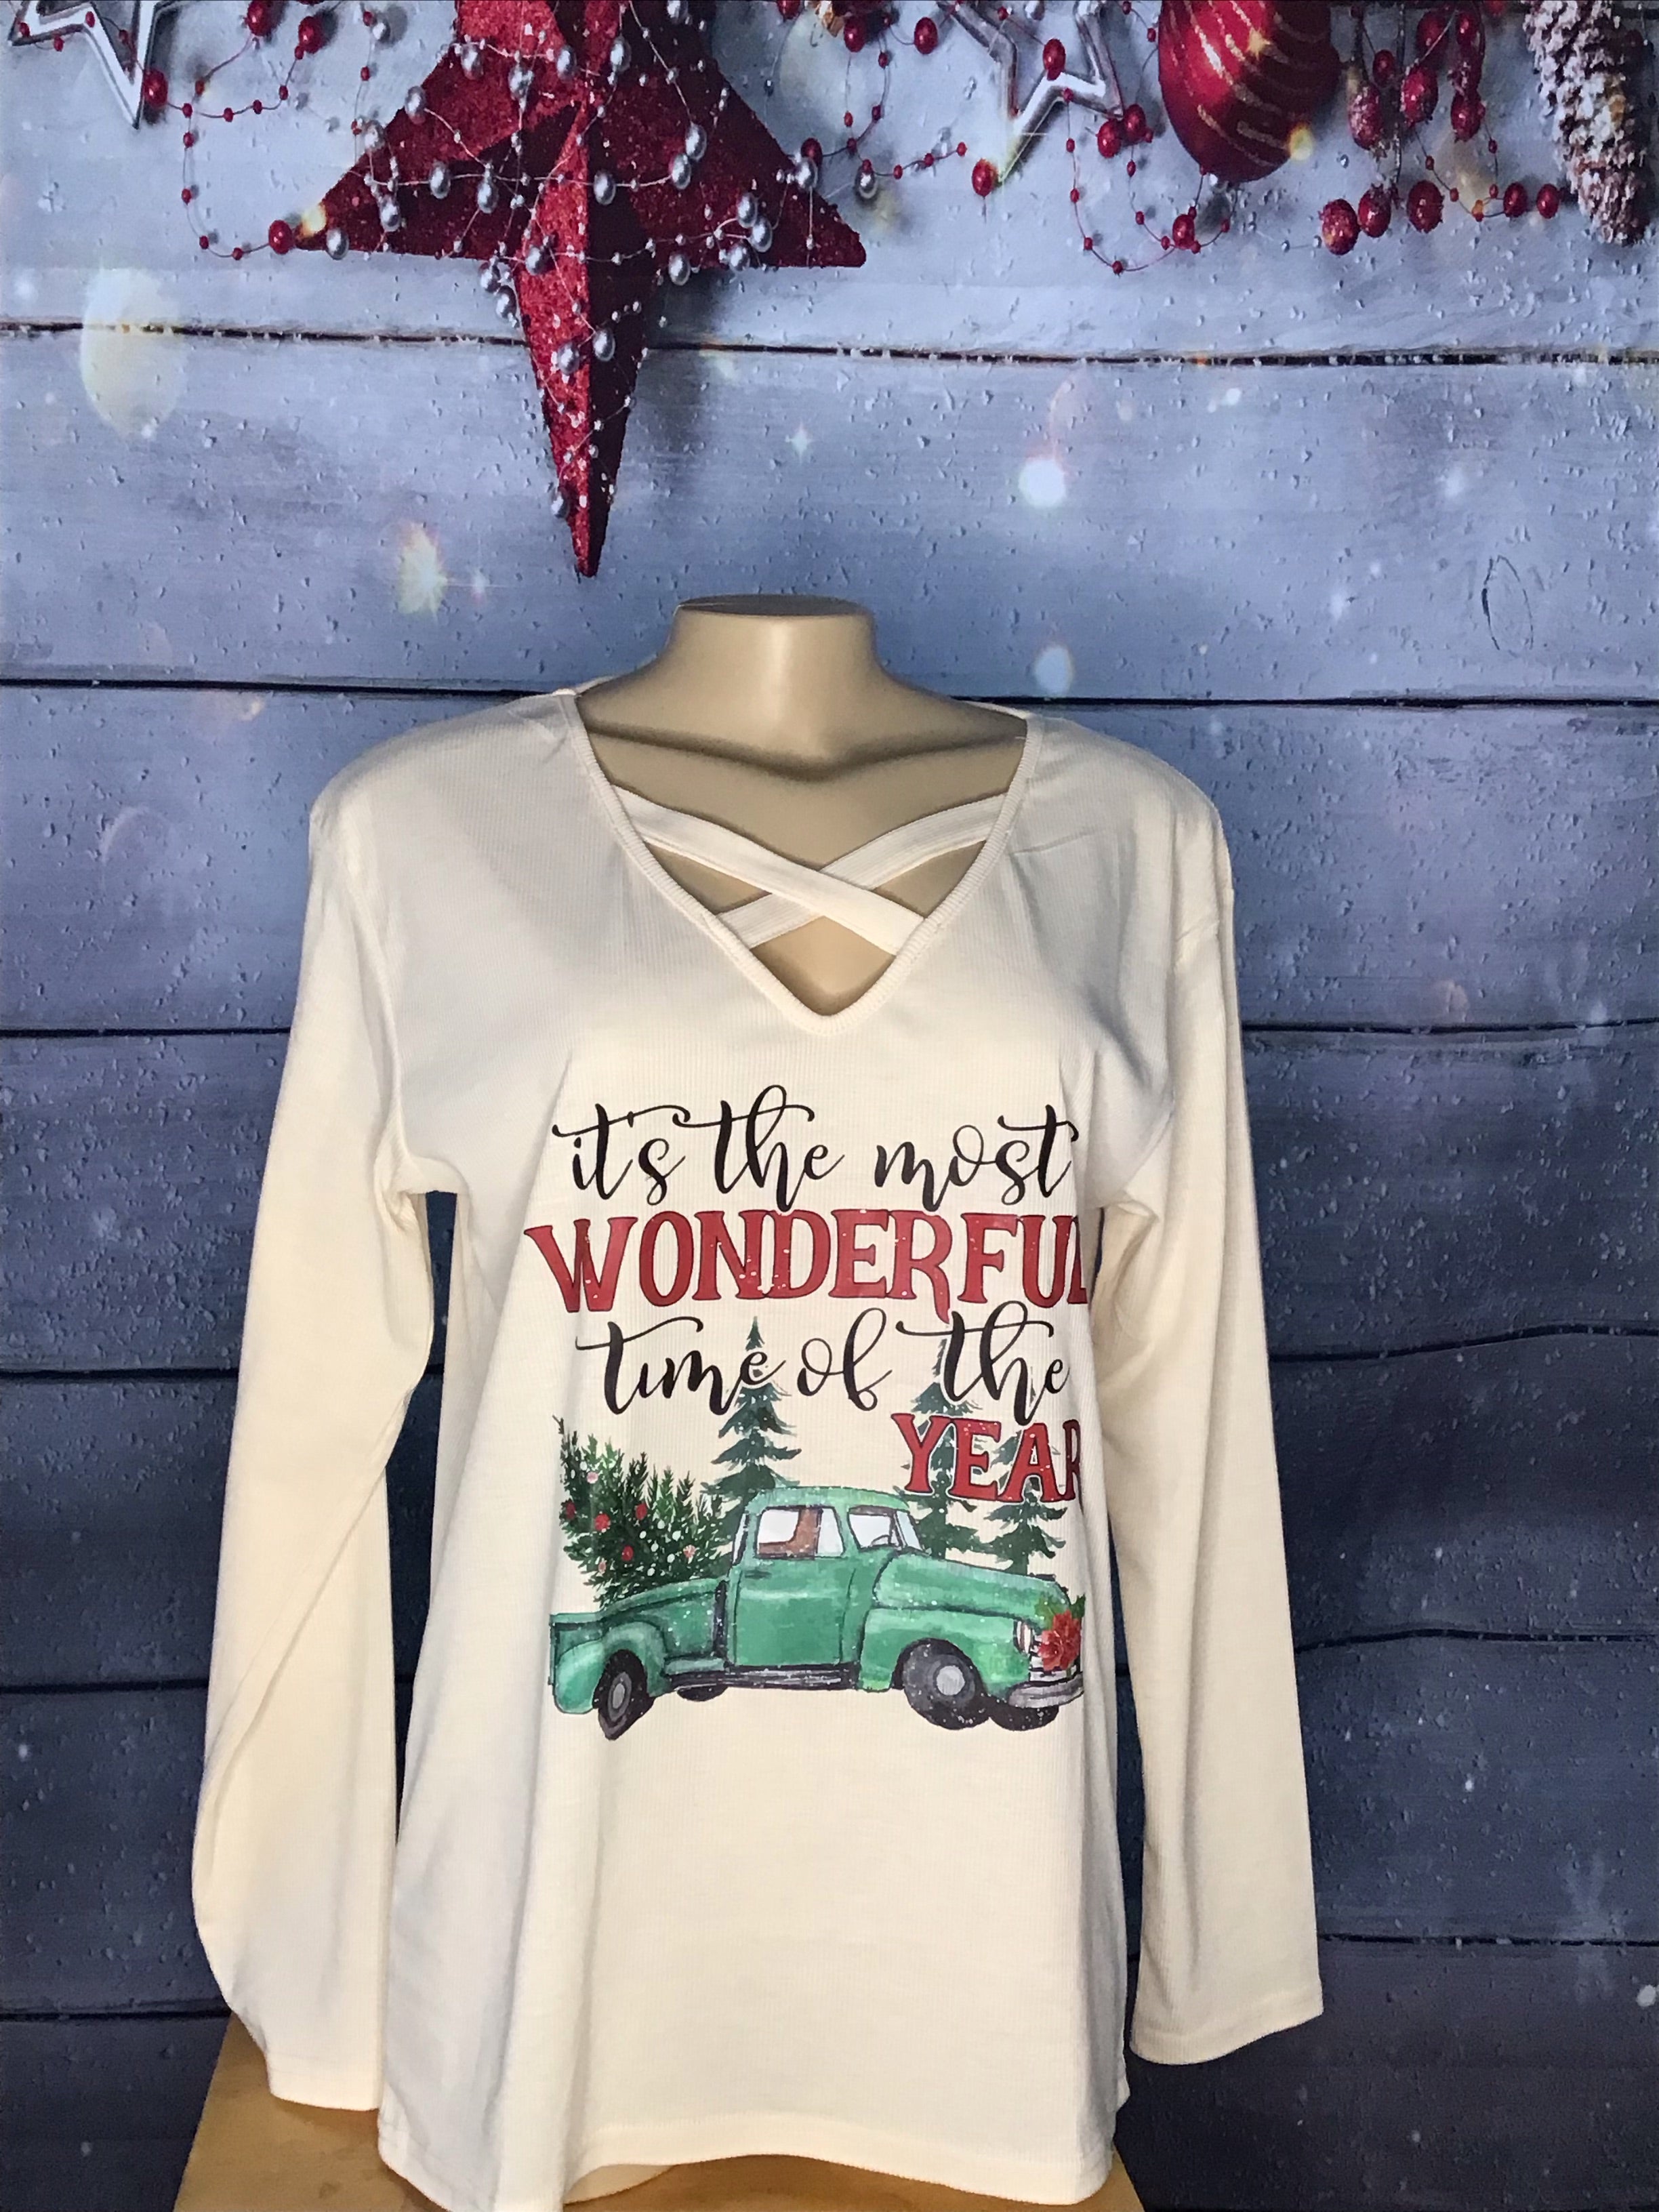 Its the most wonderful time of the year criss cross shirt Christmas's long sleeve